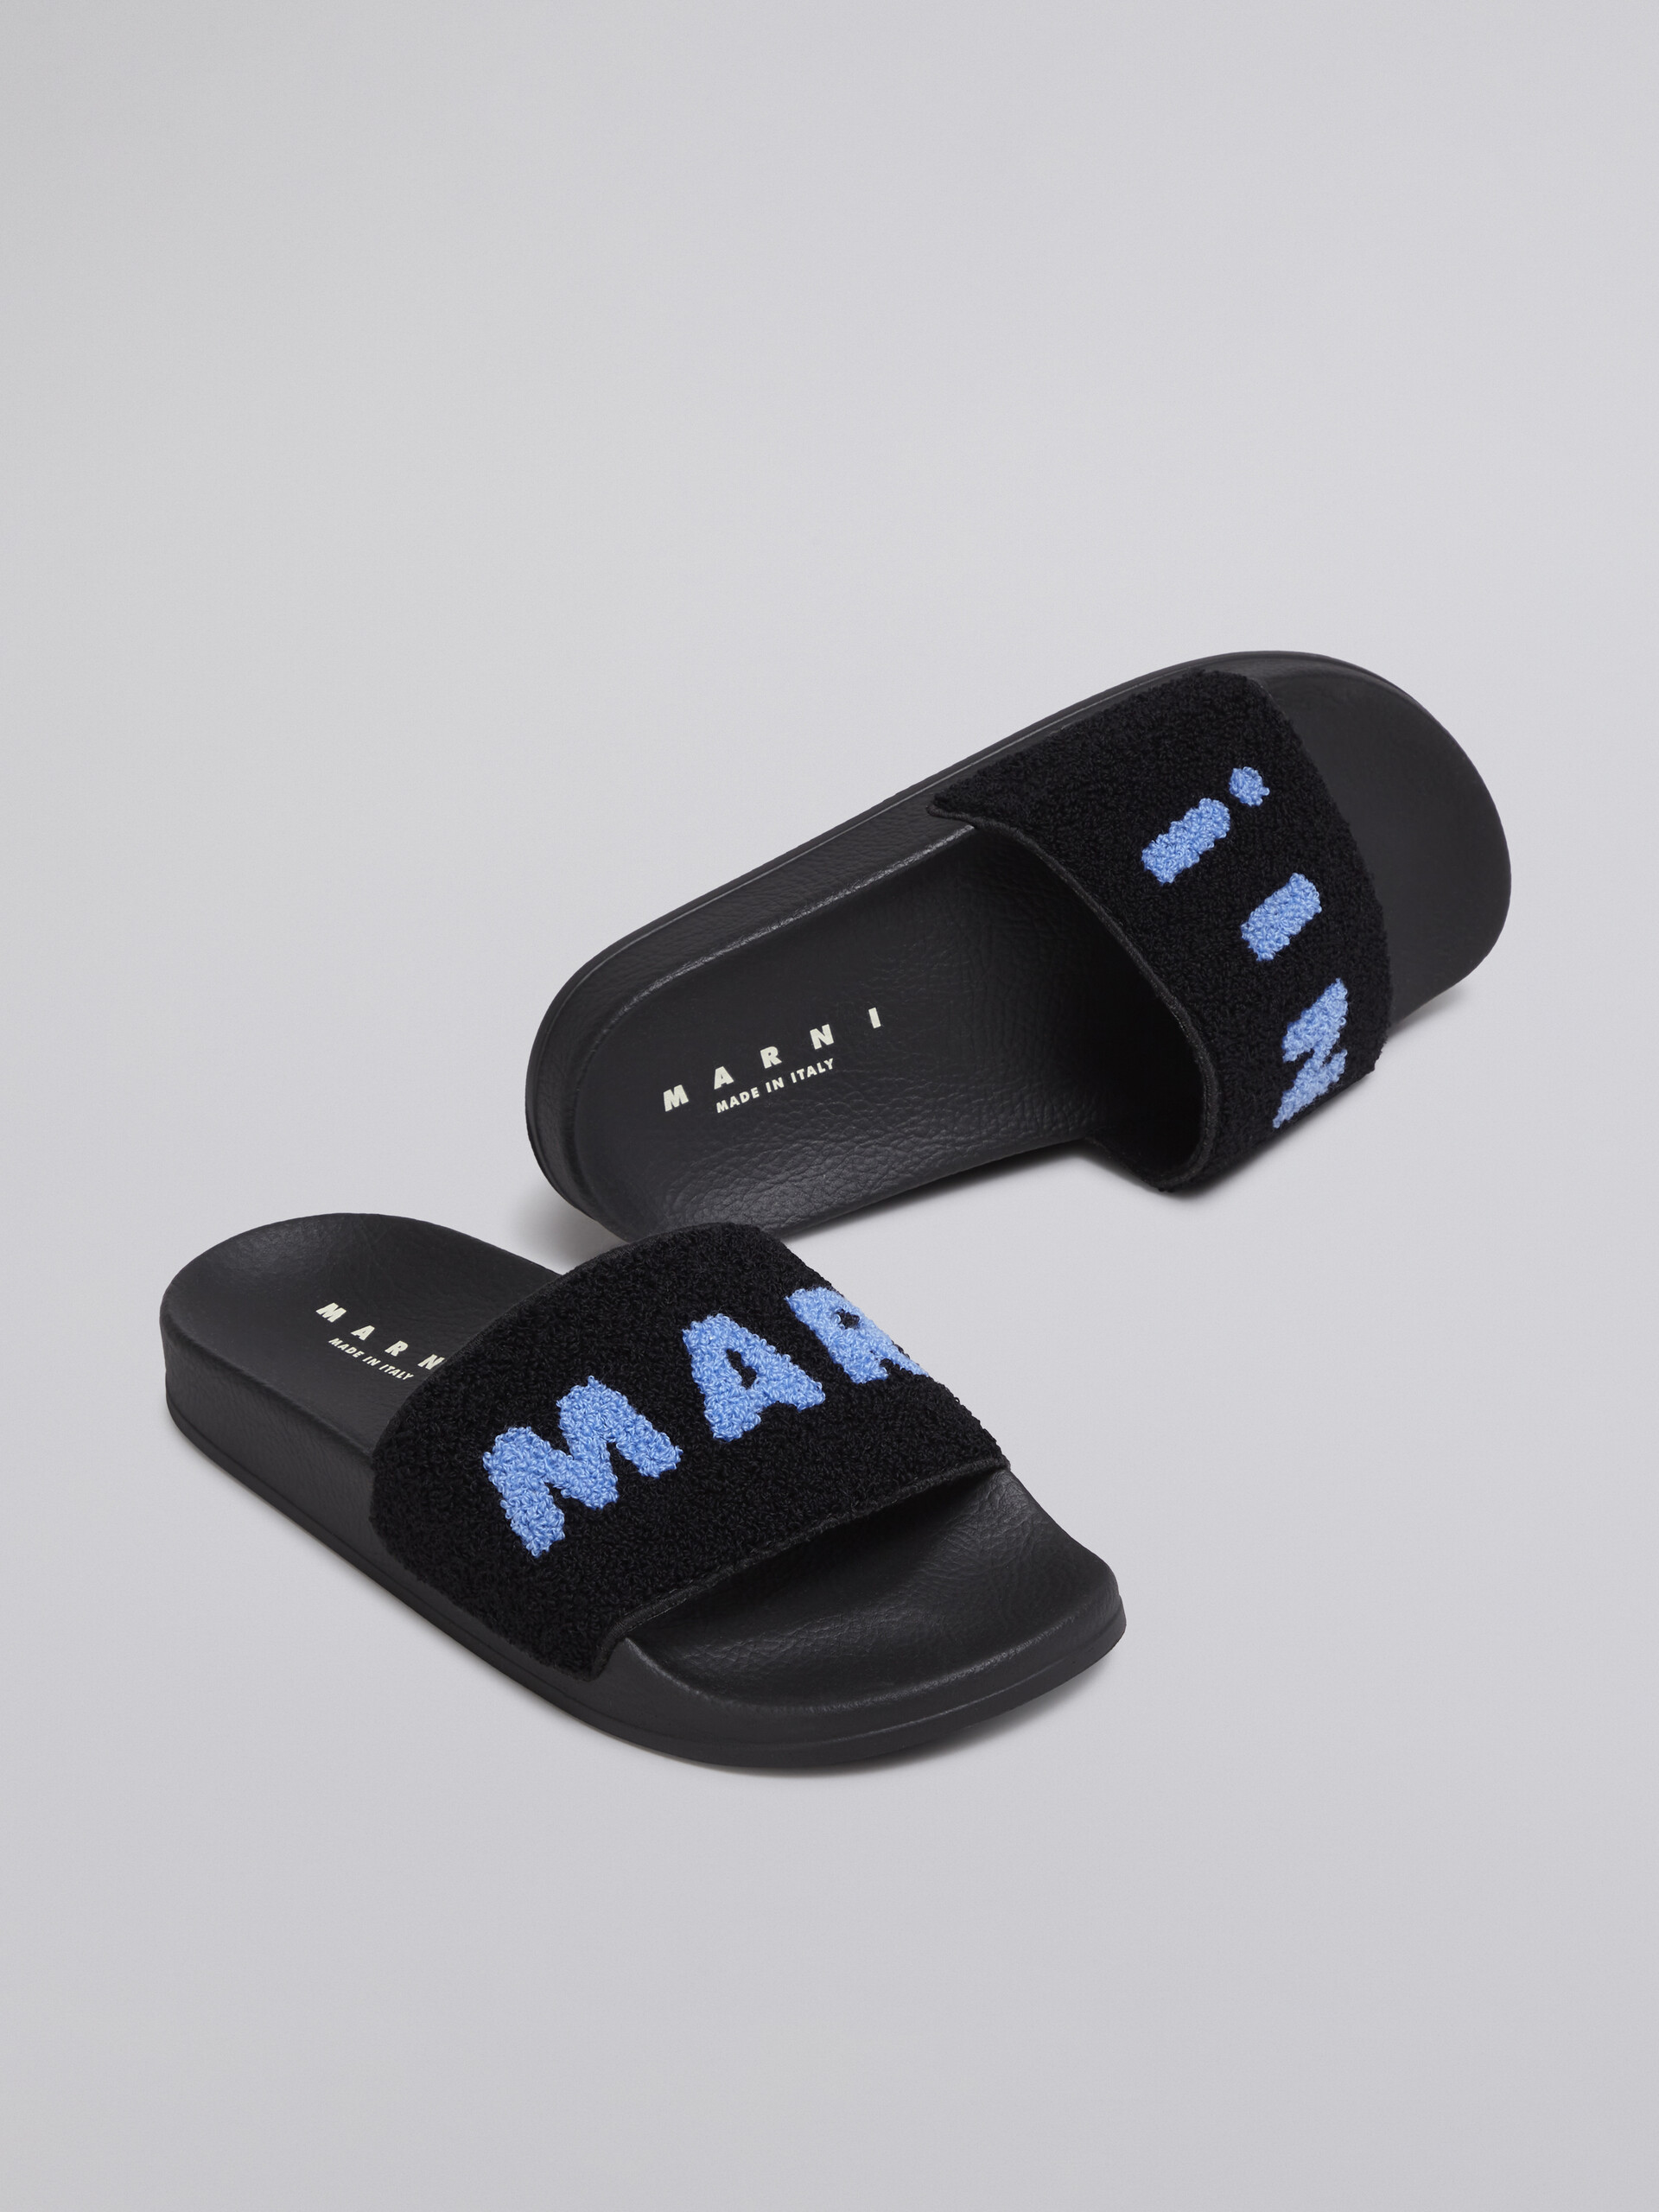 Rubber sandal with black and blue terry-cloth band - Sandals - Image 5